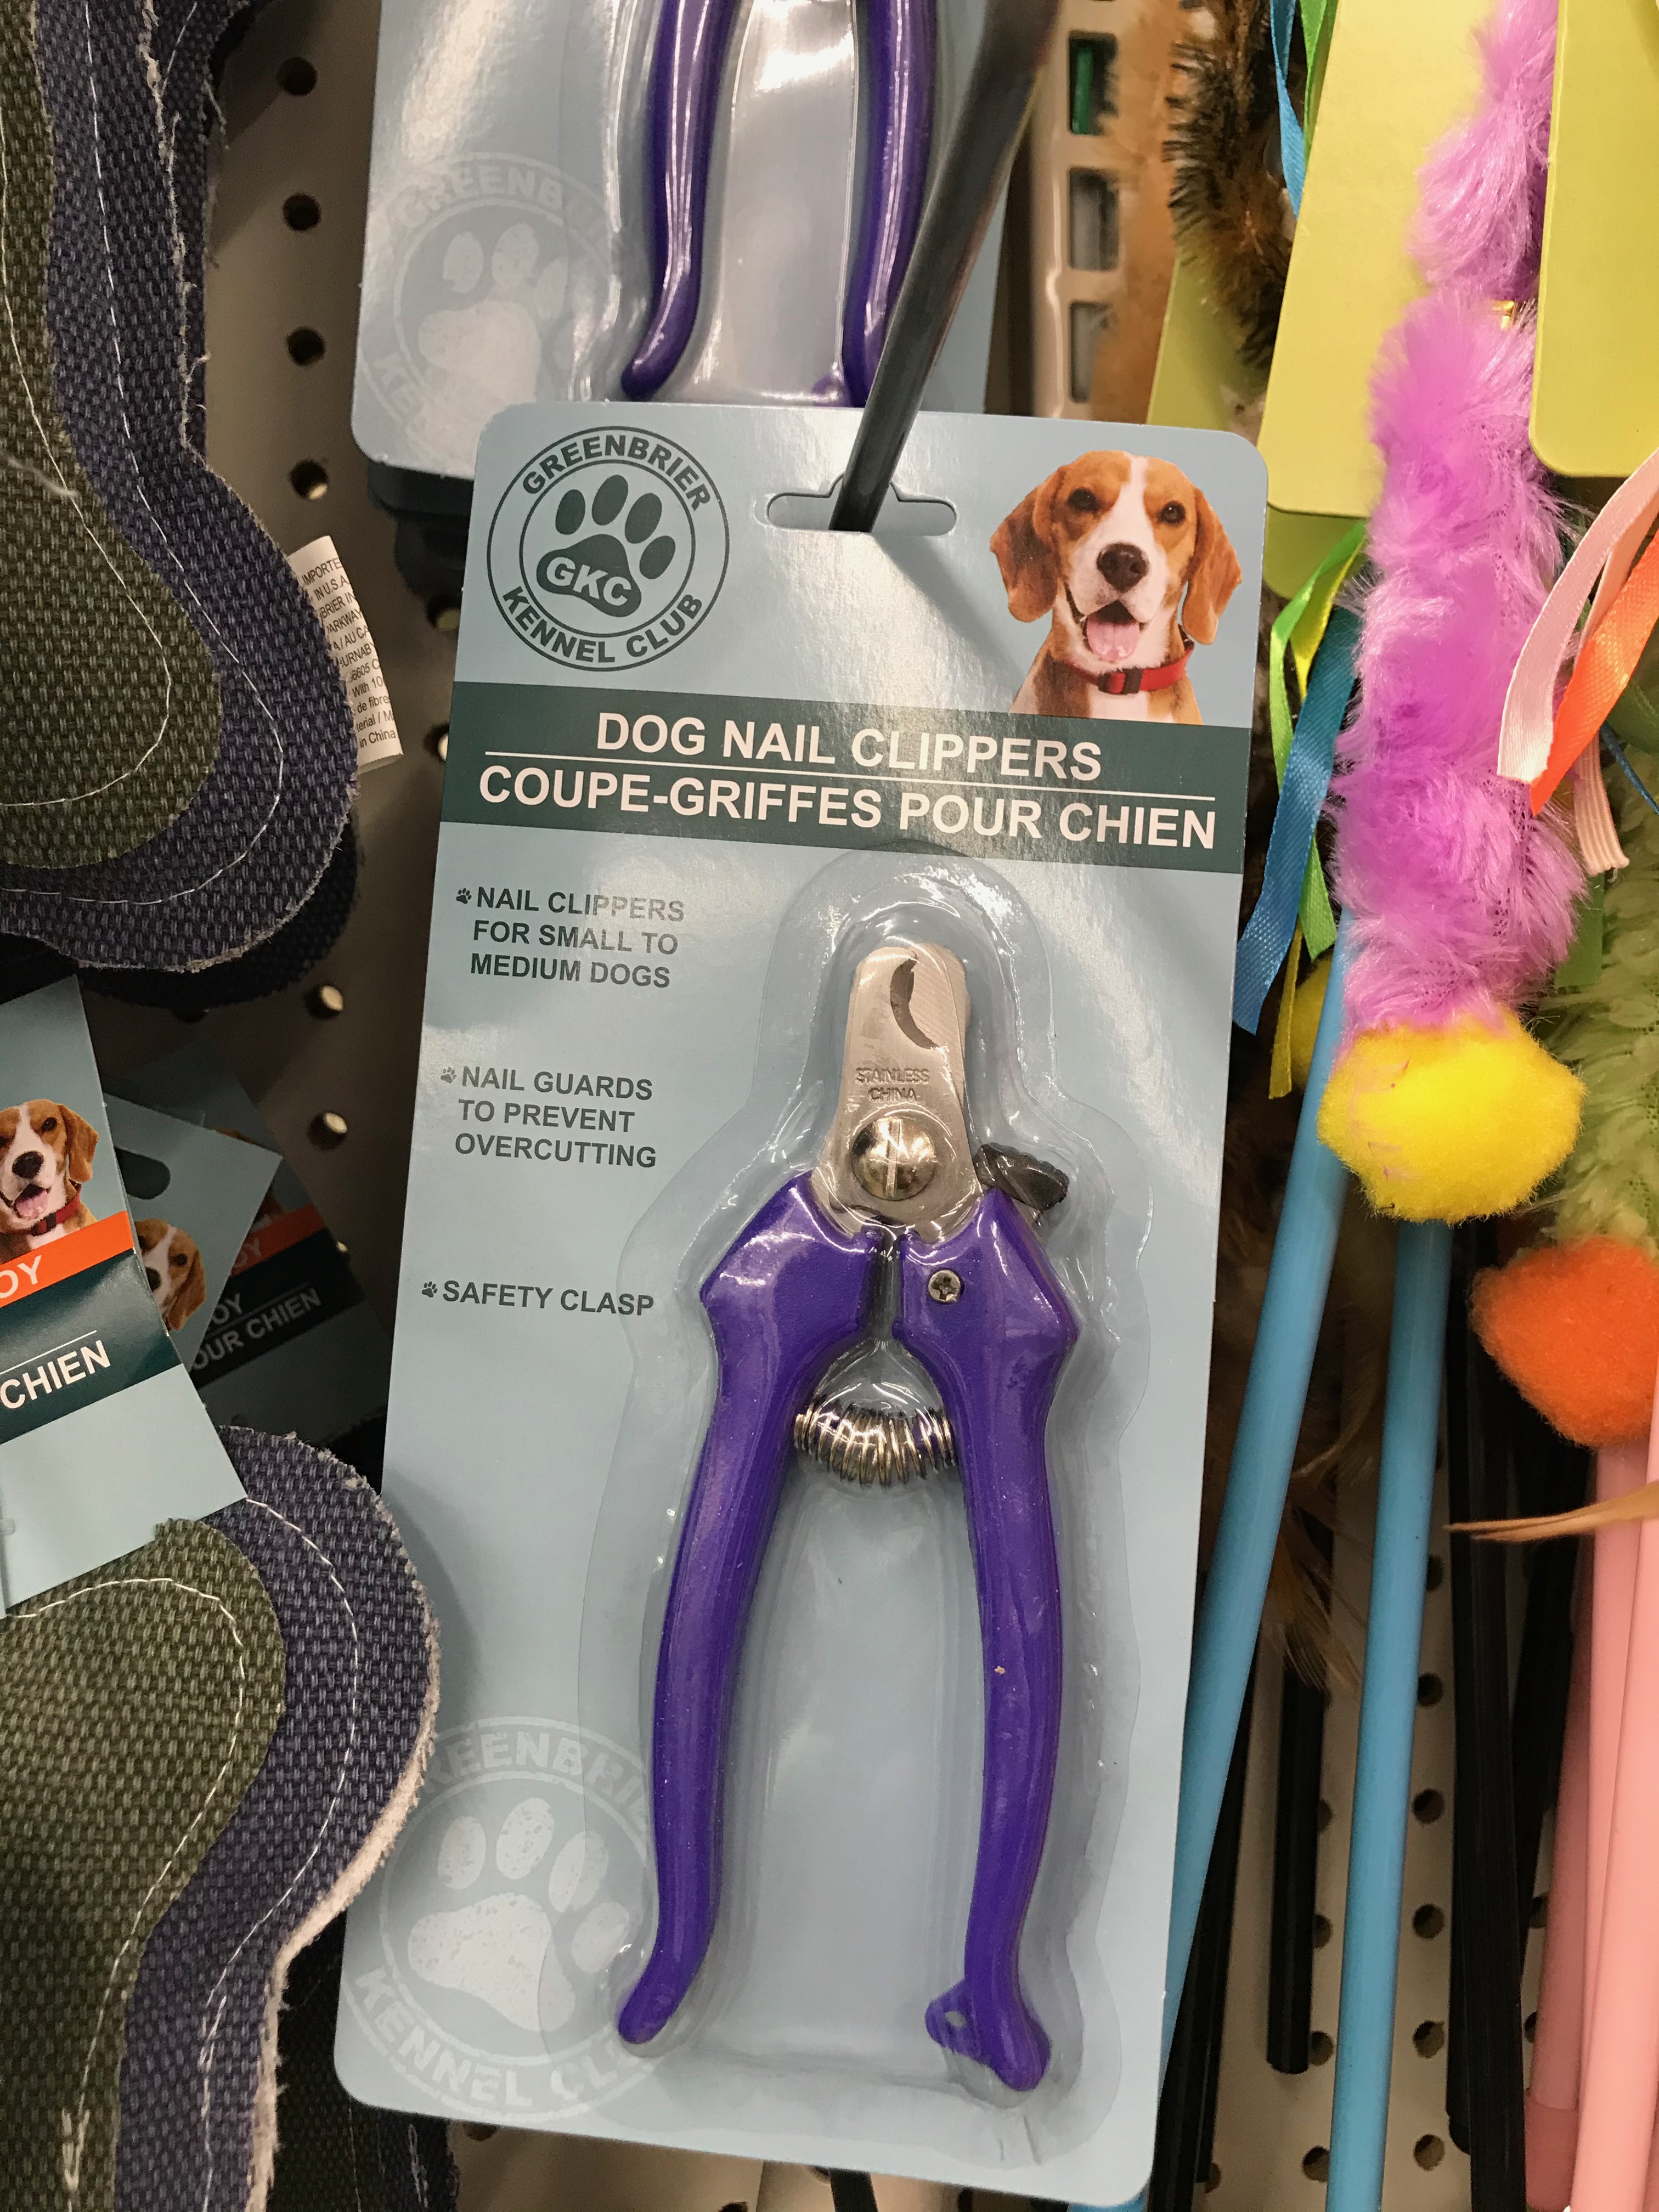 Dog Nail Clippers - Dollar Store Chicken Supplies